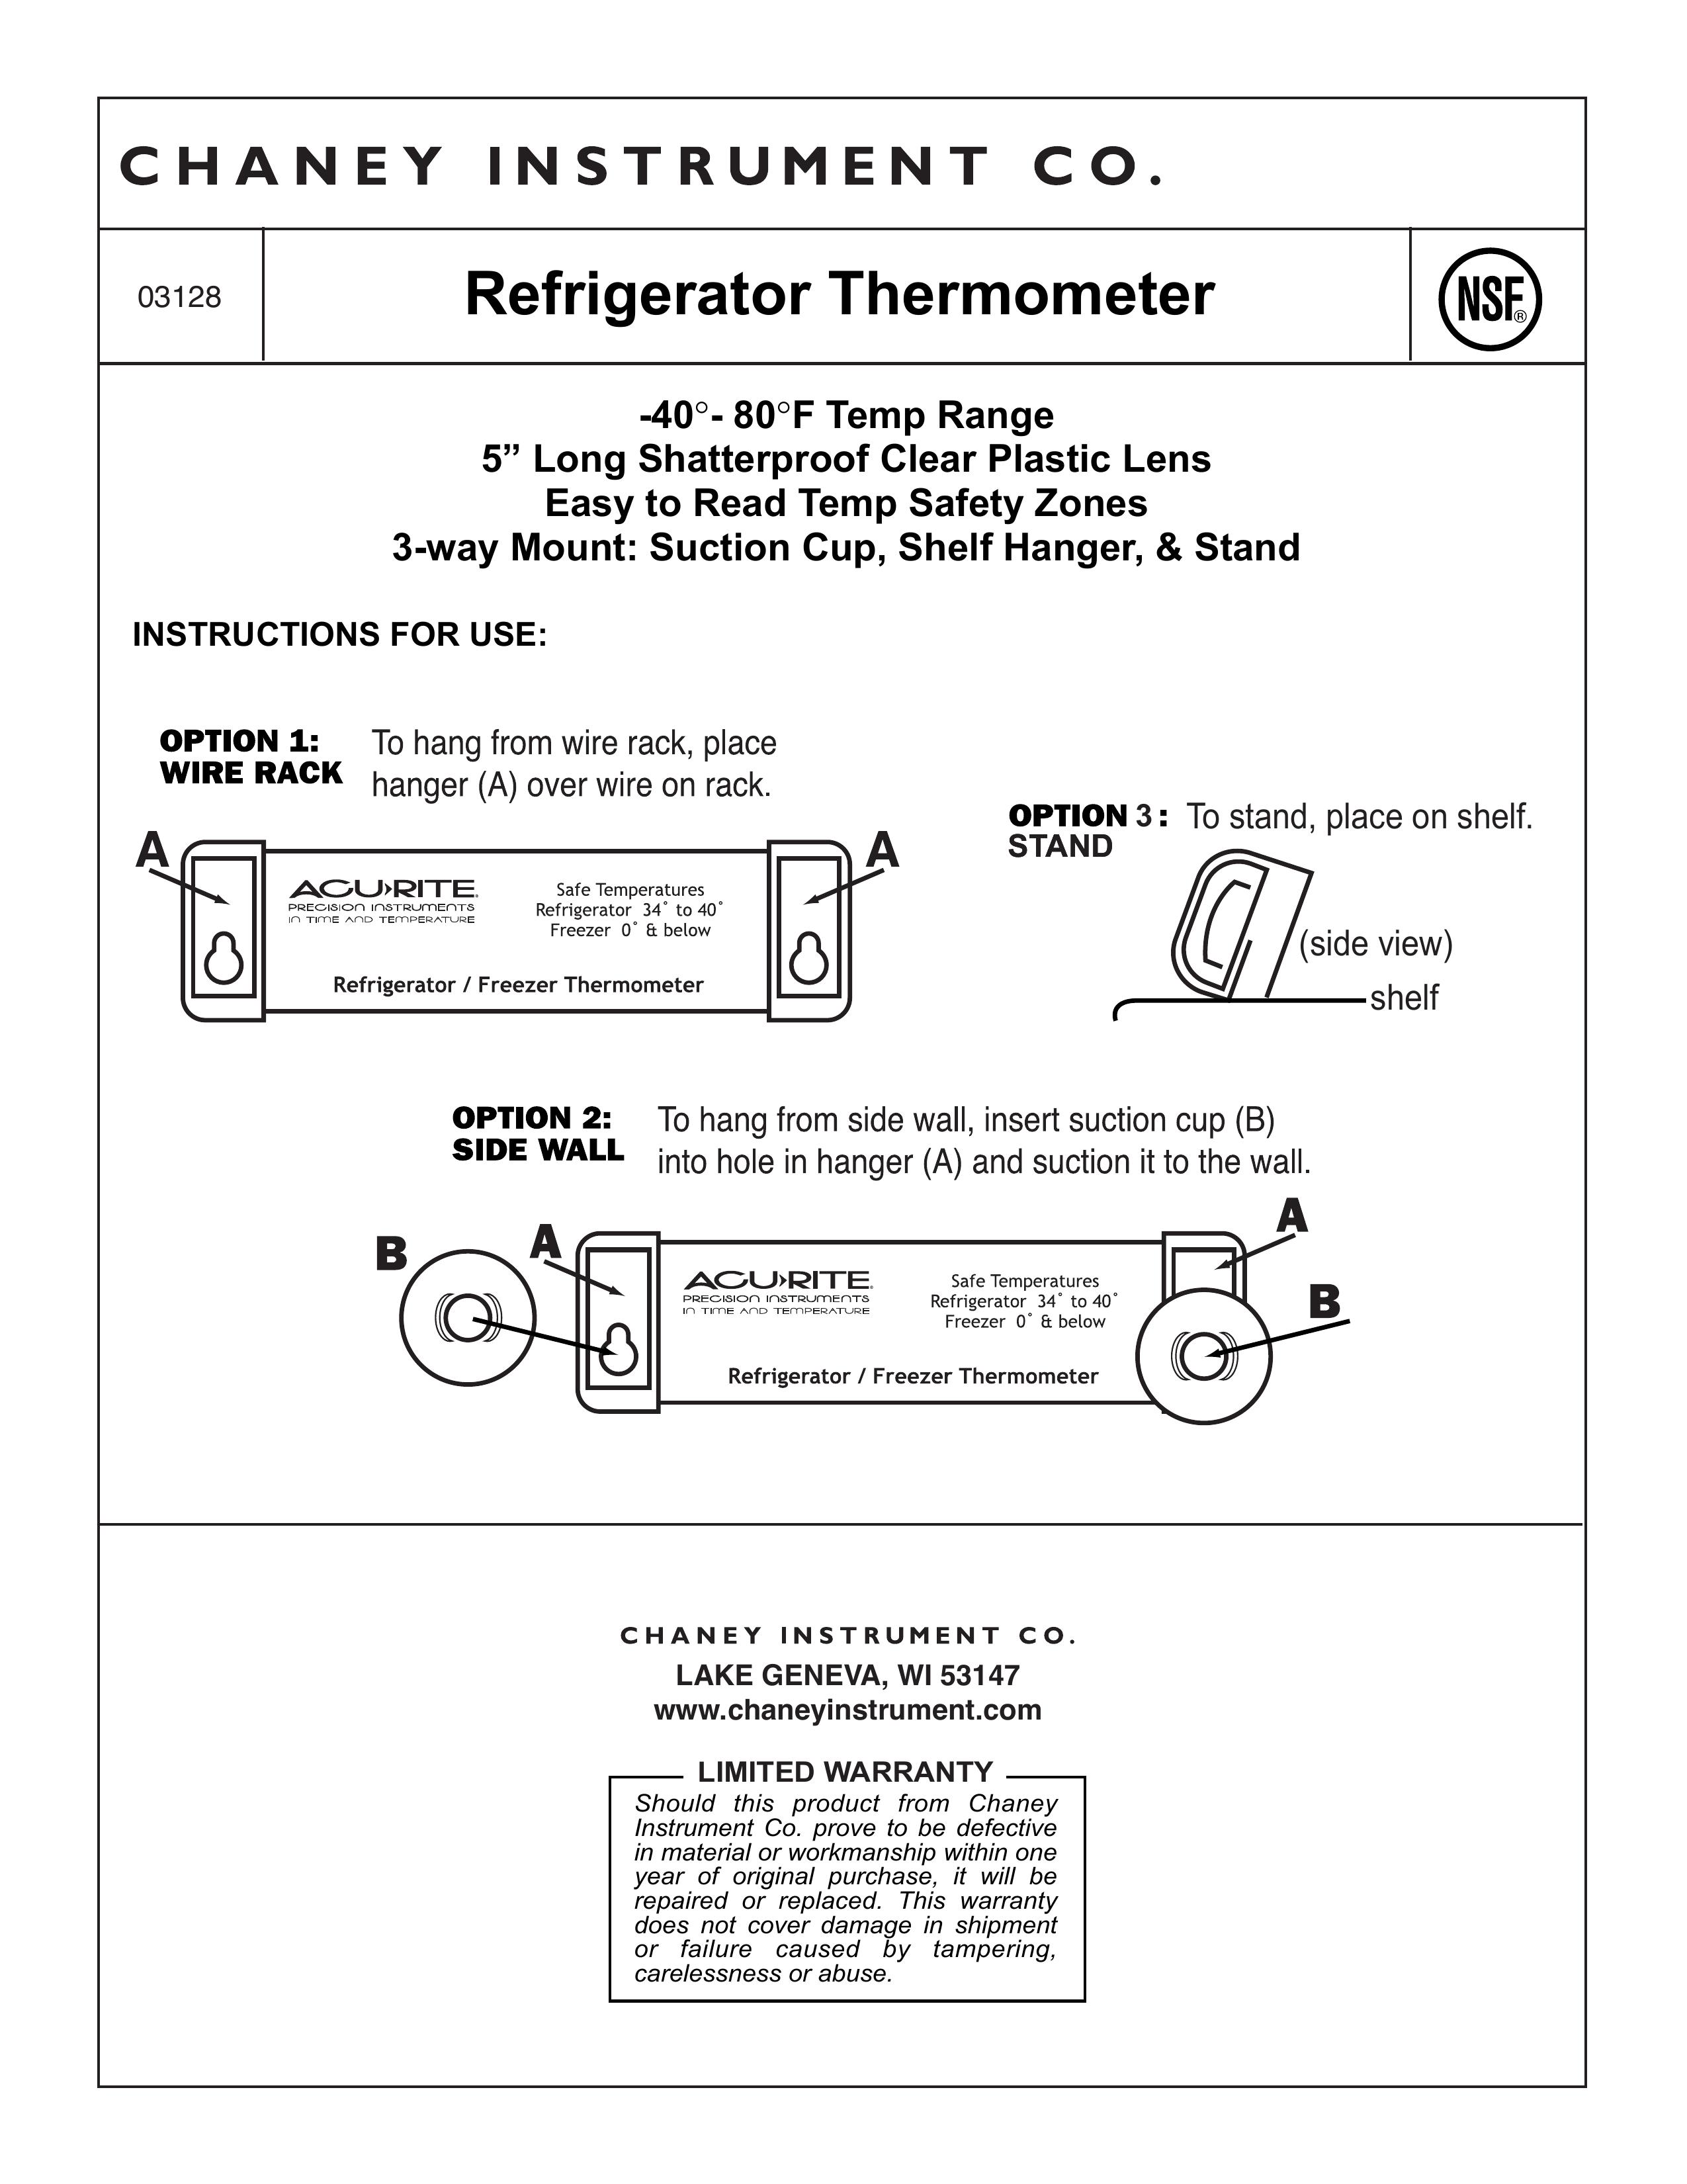 Chaney Instrument 3128 Thermometer User Manual